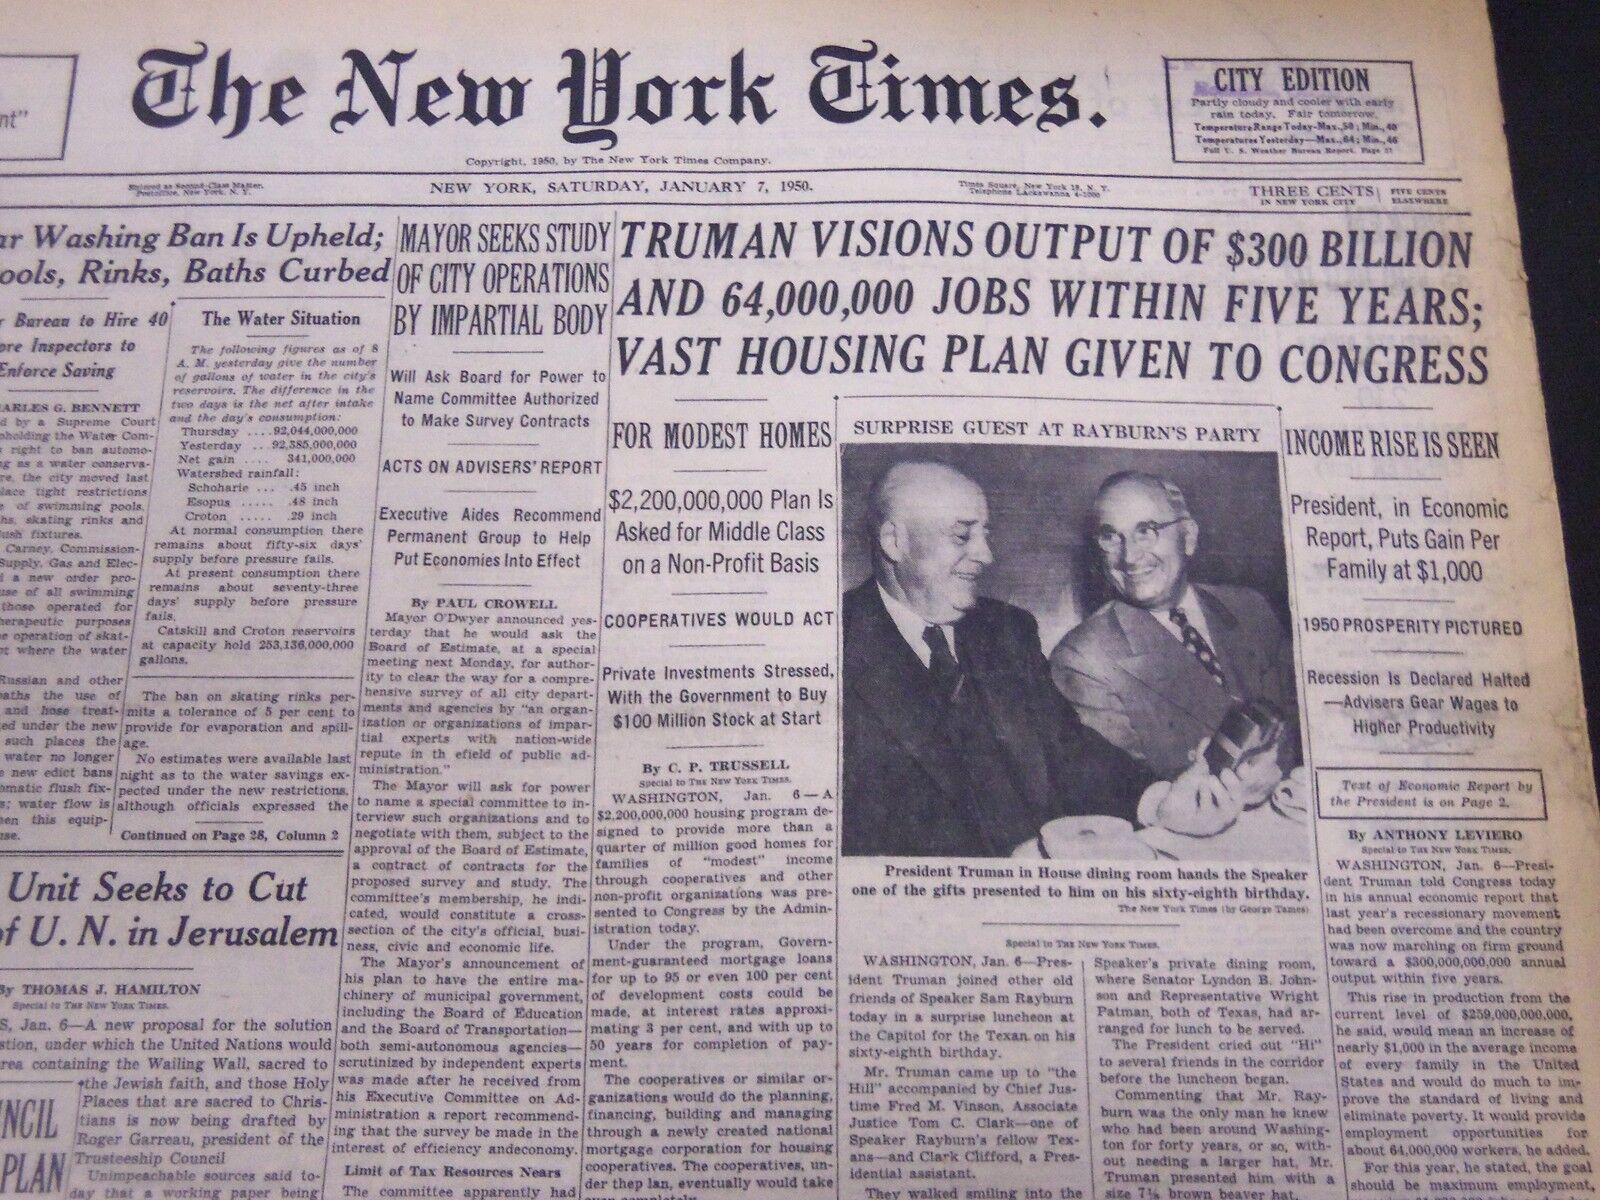 1950 JANUARY 7 NEW YORK TIMES - TRUMAN VISIONS OUTPUT OF $300 BILLION - NT 5144